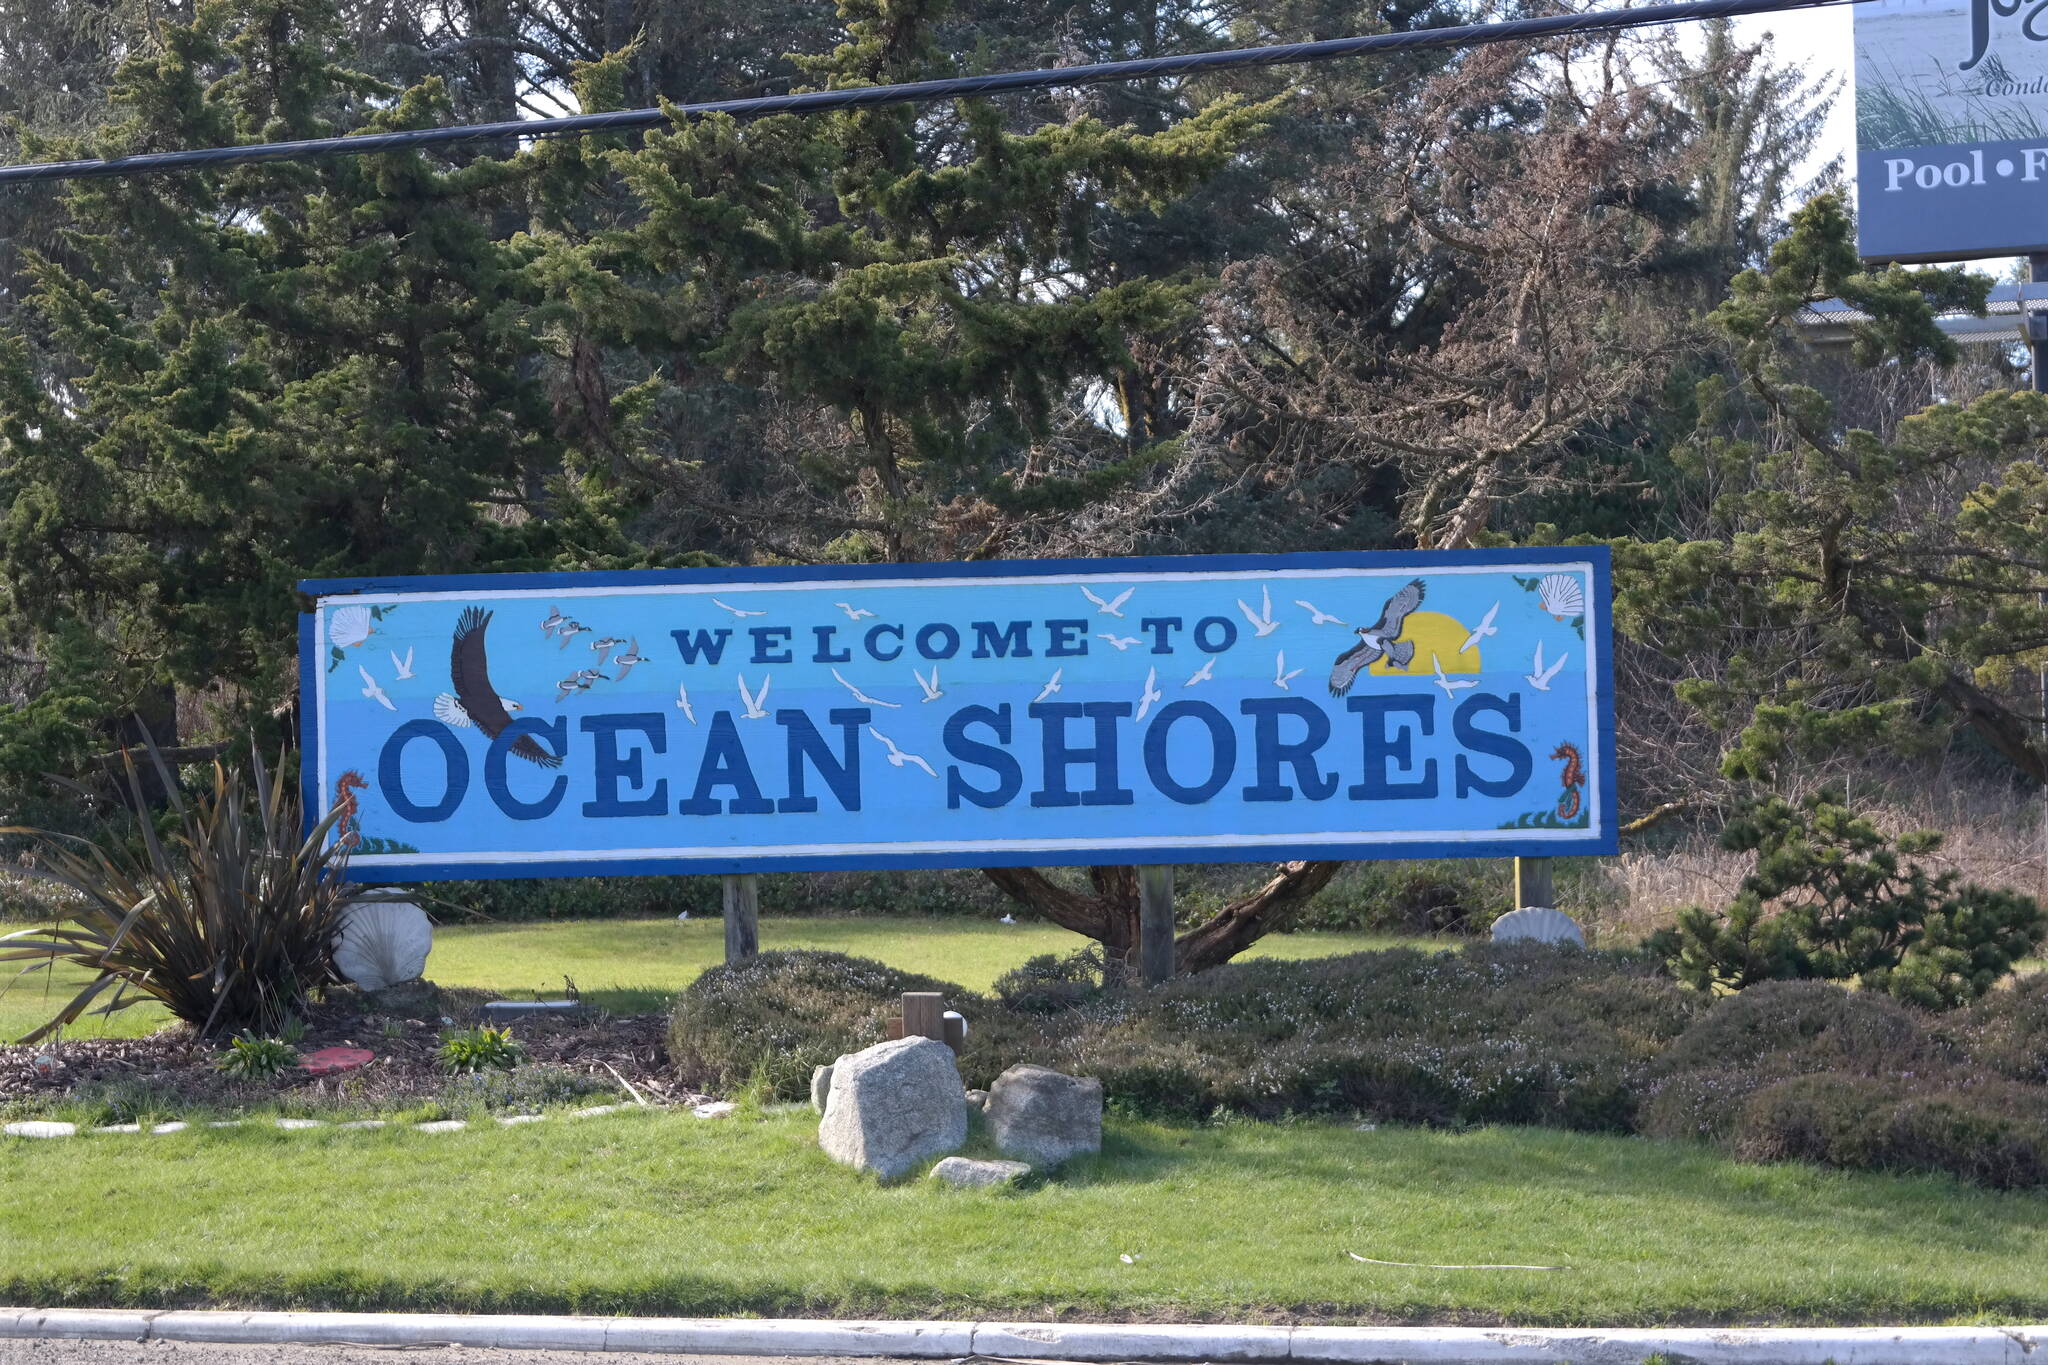 The City of Ocean Shores currently has 94 employees, according to Mayor Jon Martin, who expects the count to be over 100 by the end of the year. Erika Gebhardt I The Daily World